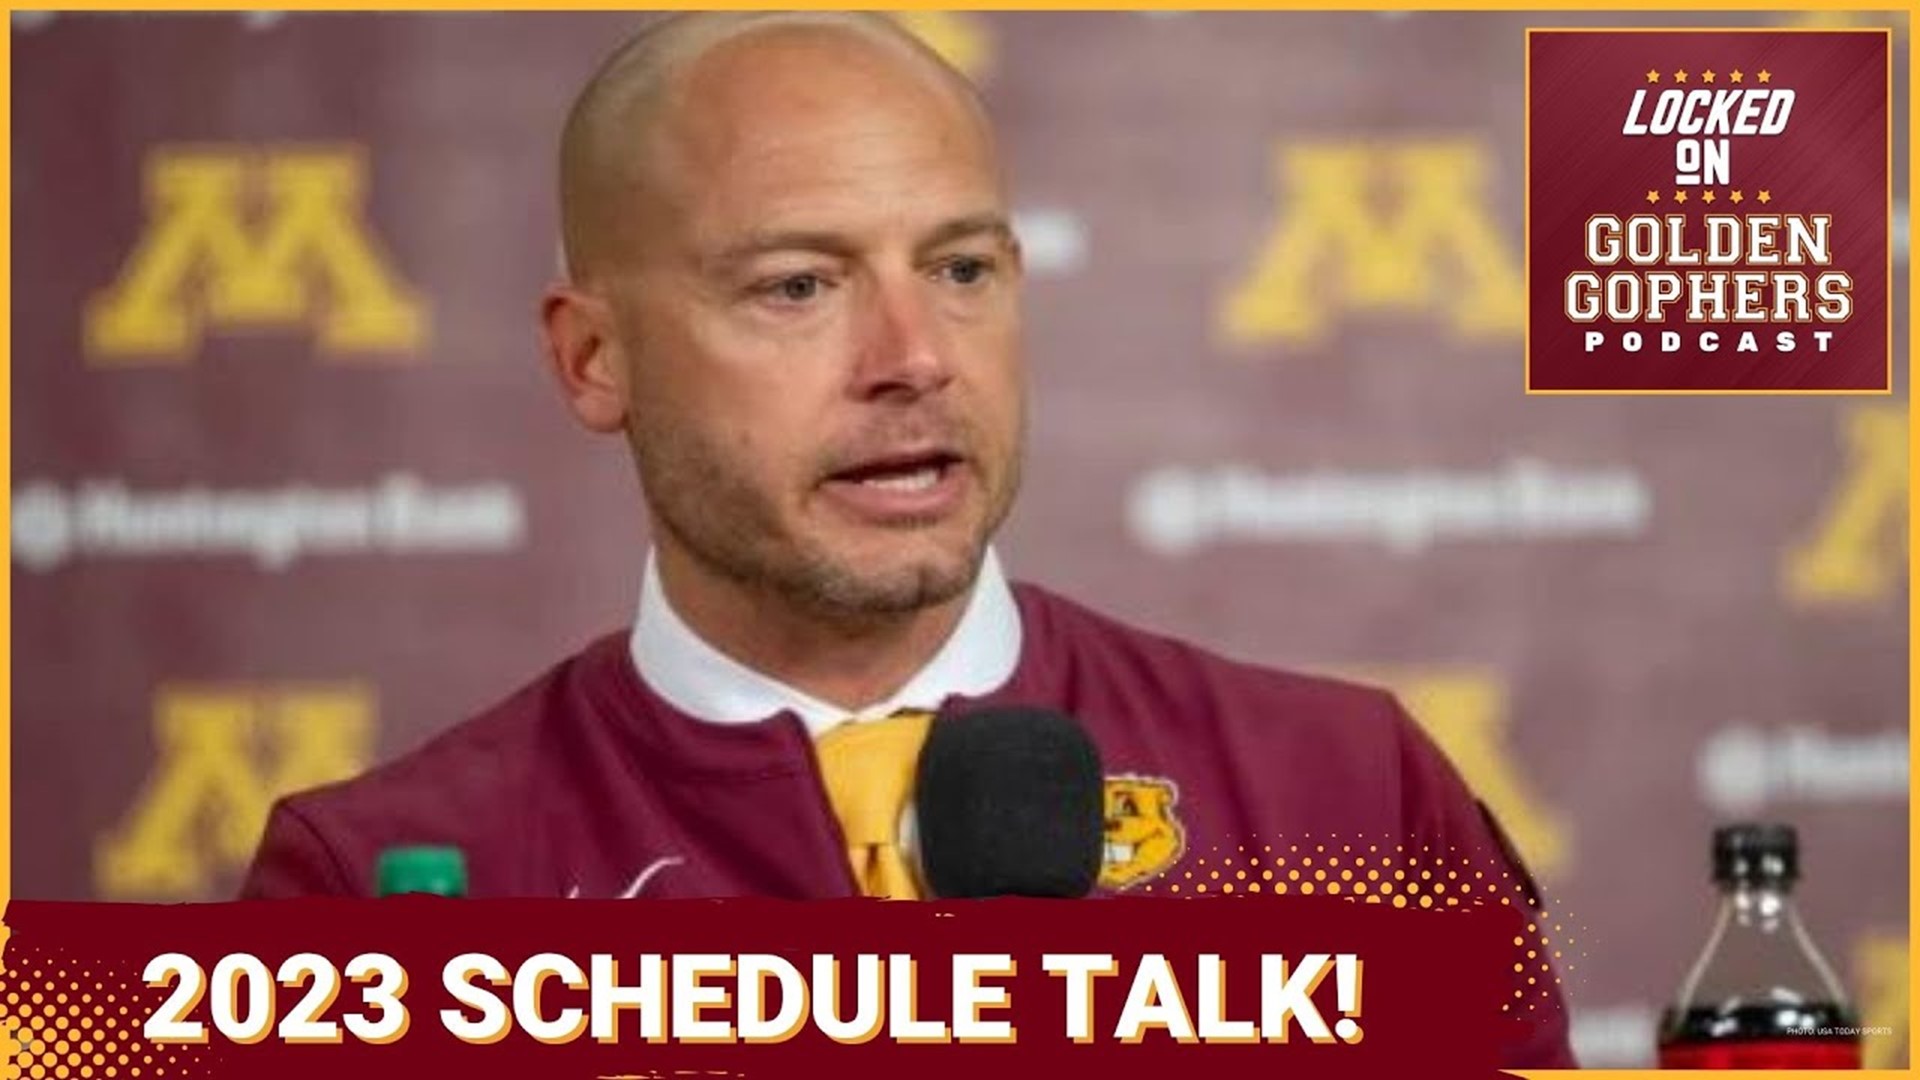 On today's show we discuss the Gophers 2023 schedule. We take a look at the run heavy vs pass heavy teams of each opponent.